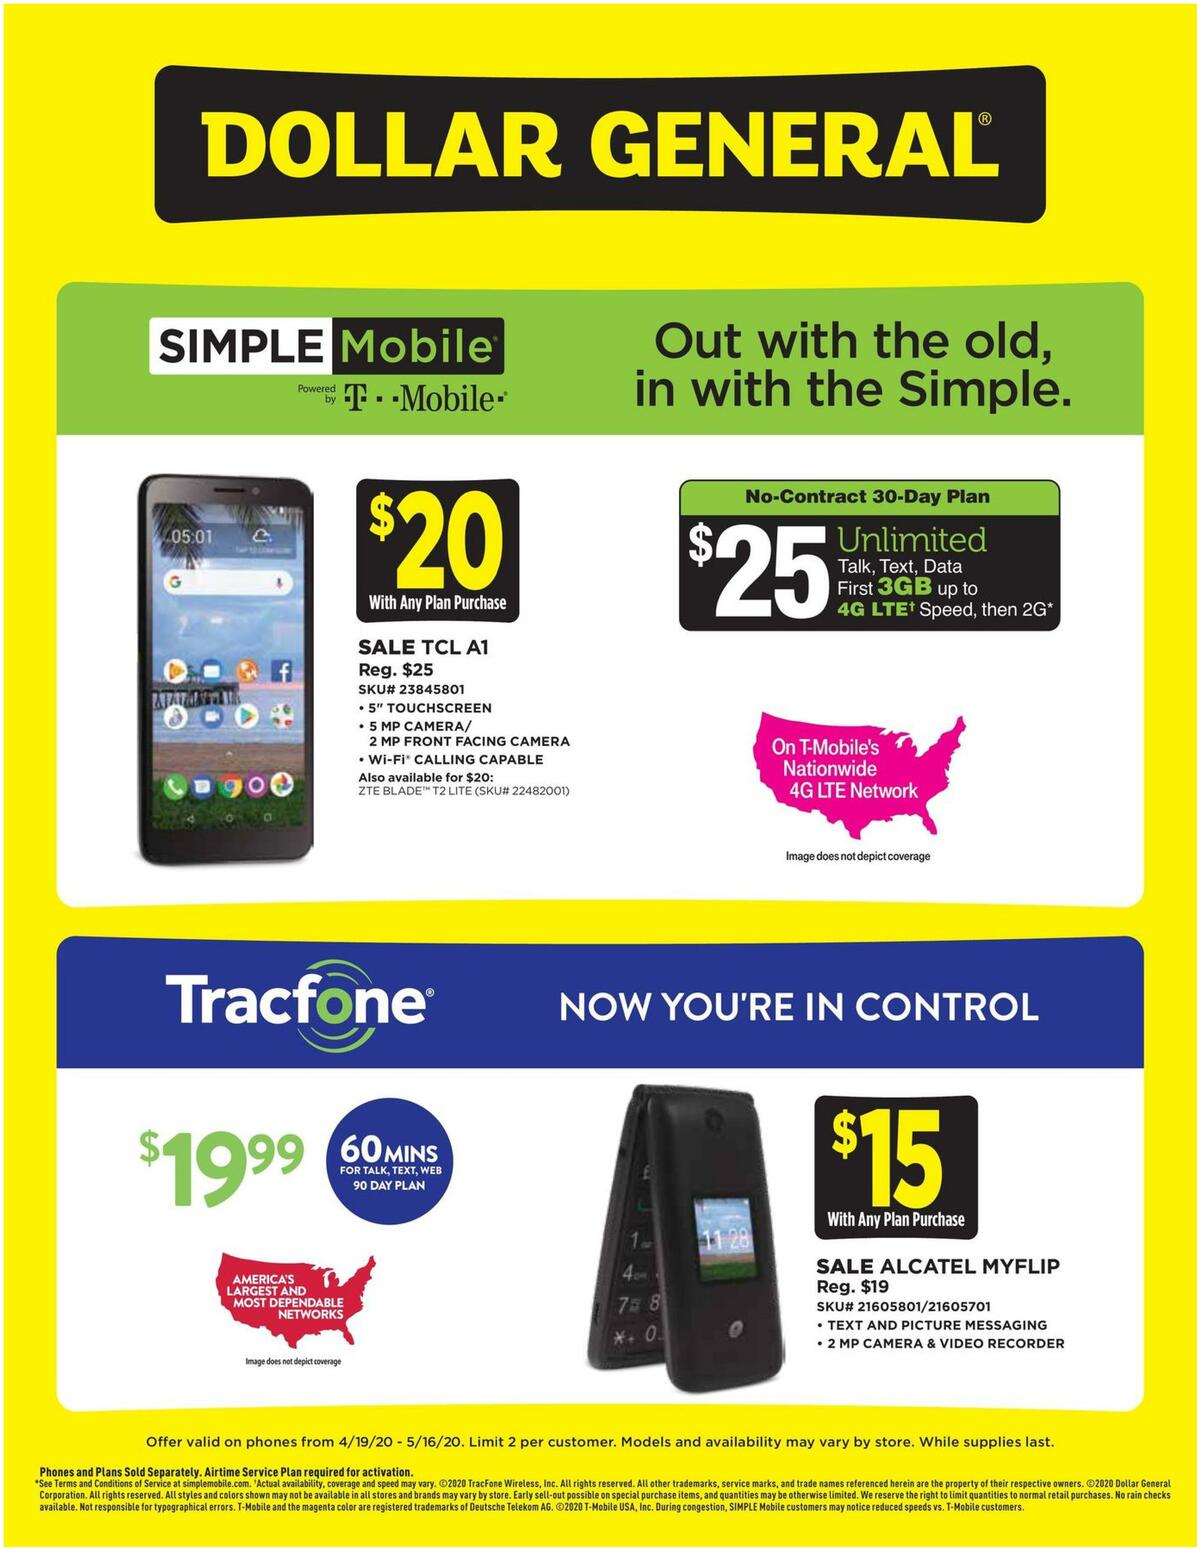 Dollar General Weekly Wireless Specials Weekly Ad from April 19